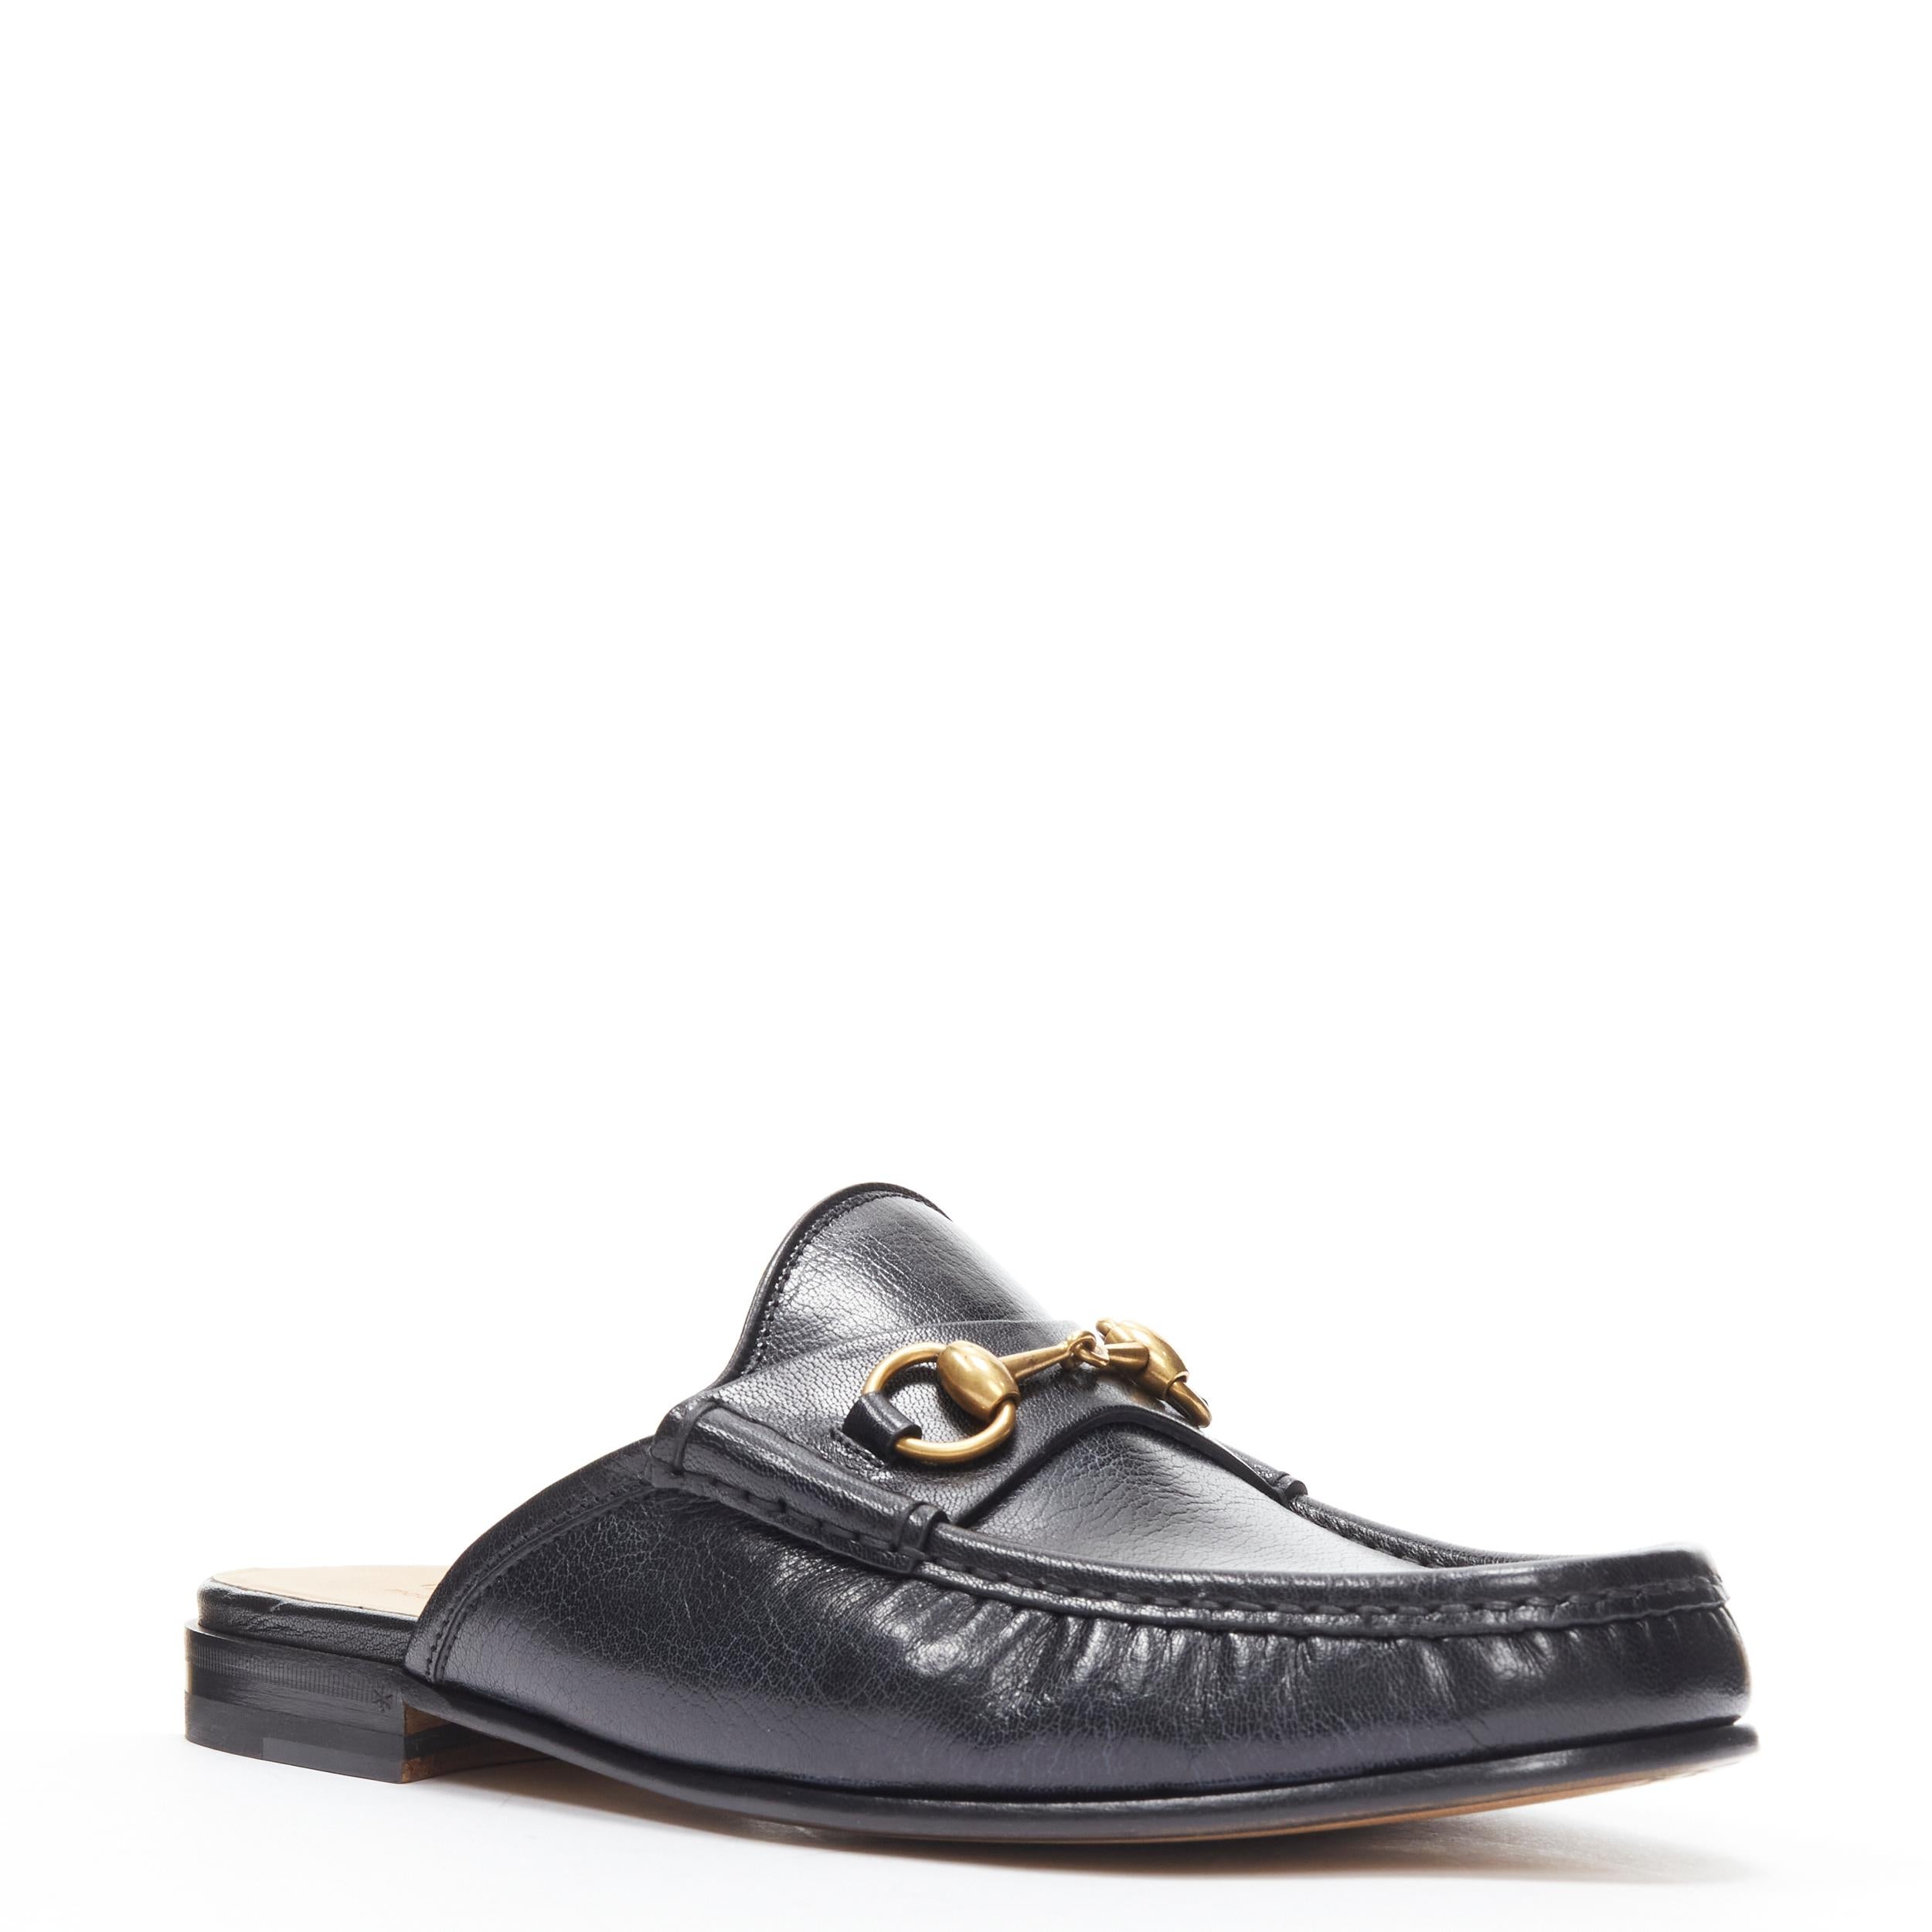 new GUCCI Quentin Nero black leather gold Horsebit slip on loafer UK10 US11 EU44 
Reference: TGAS/B02143 
Brand: Gucci 
Designer: Alessandro Michele 
Model: Quentin 
Material: Leather 
Color: Black 
Pattern: Solid 
Extra Detail: Quentin. Black